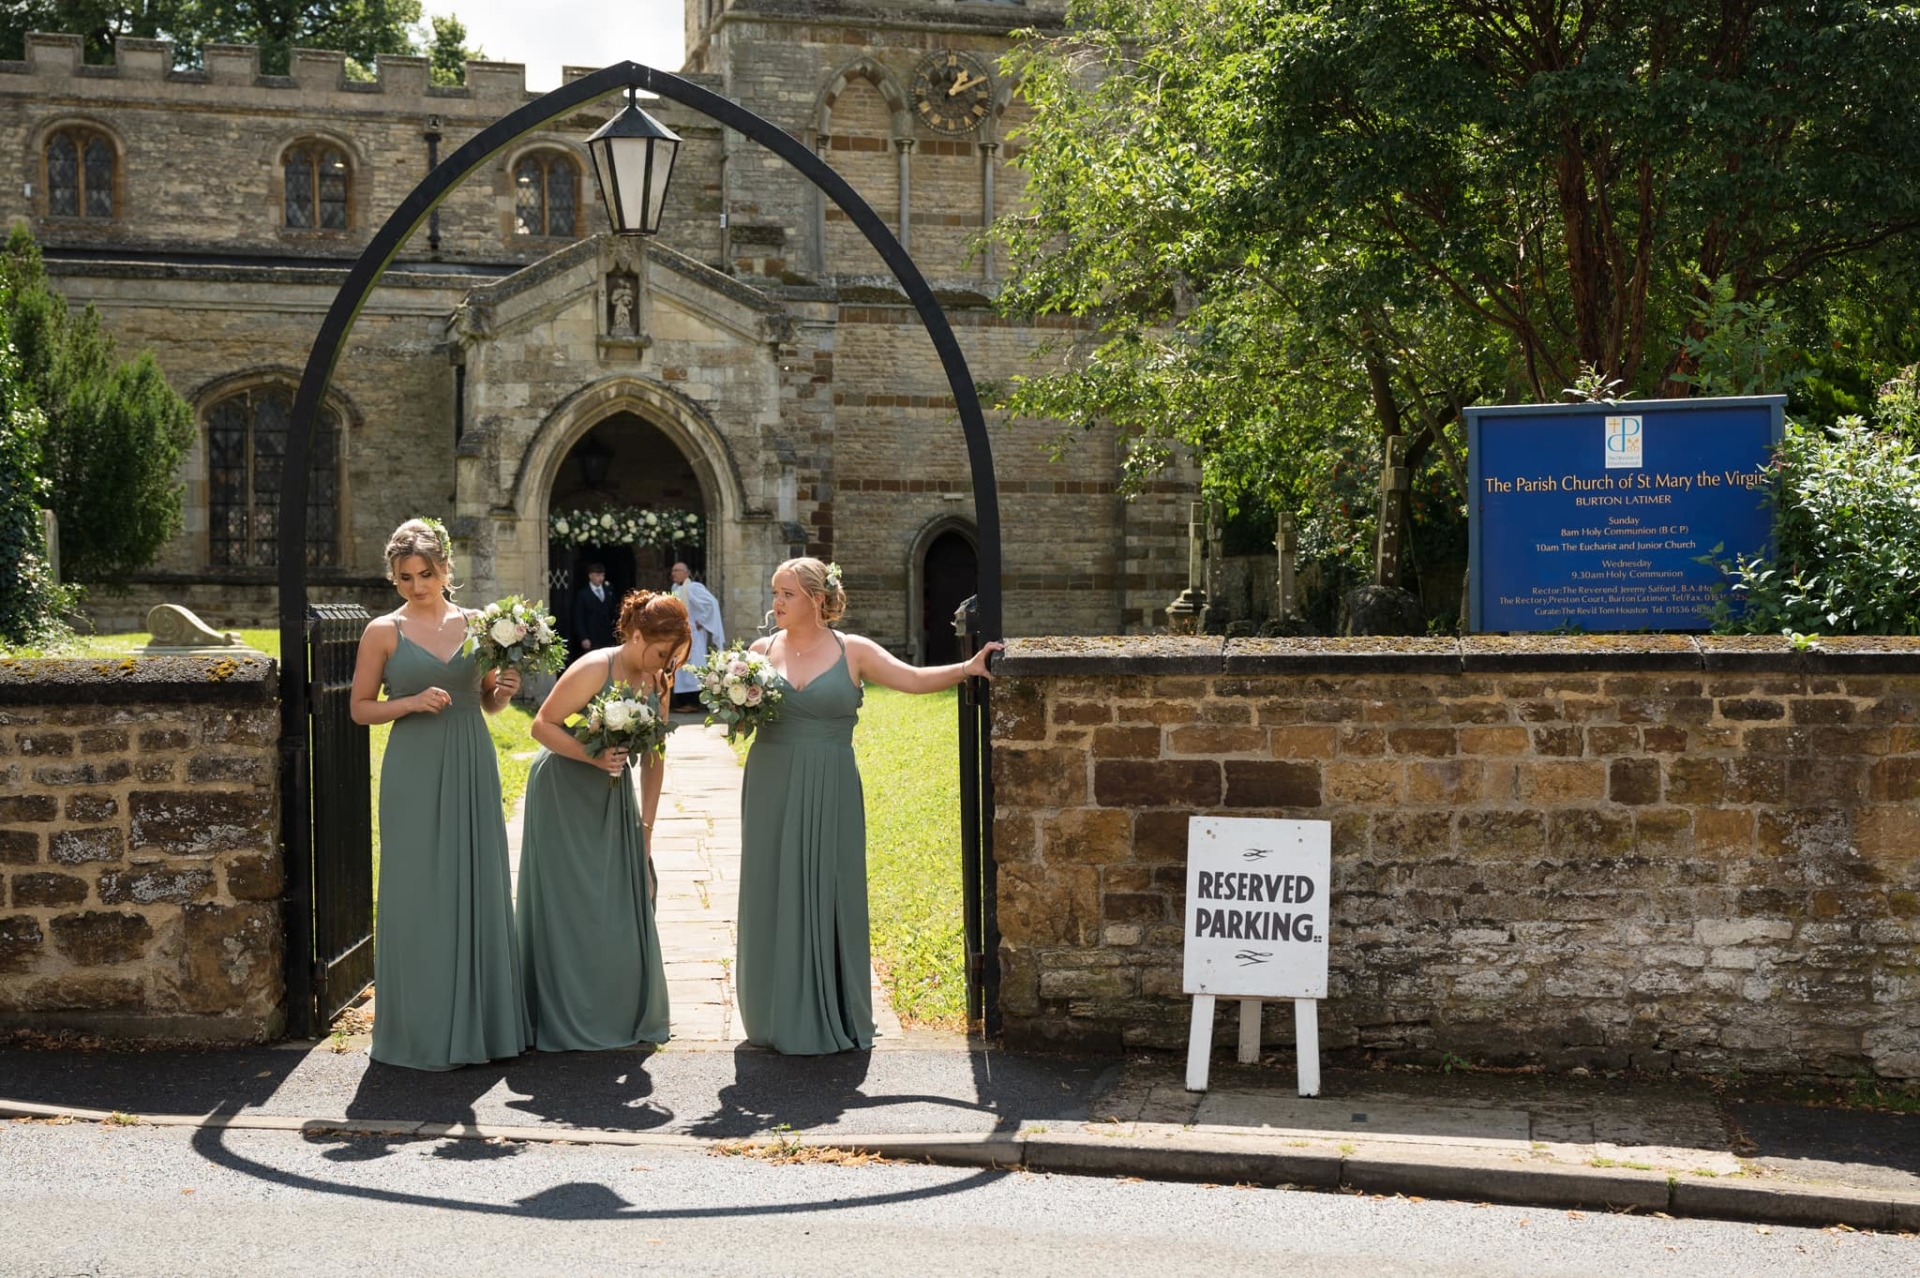 Bridesmaids waiting under arch outside church for bride to arrive